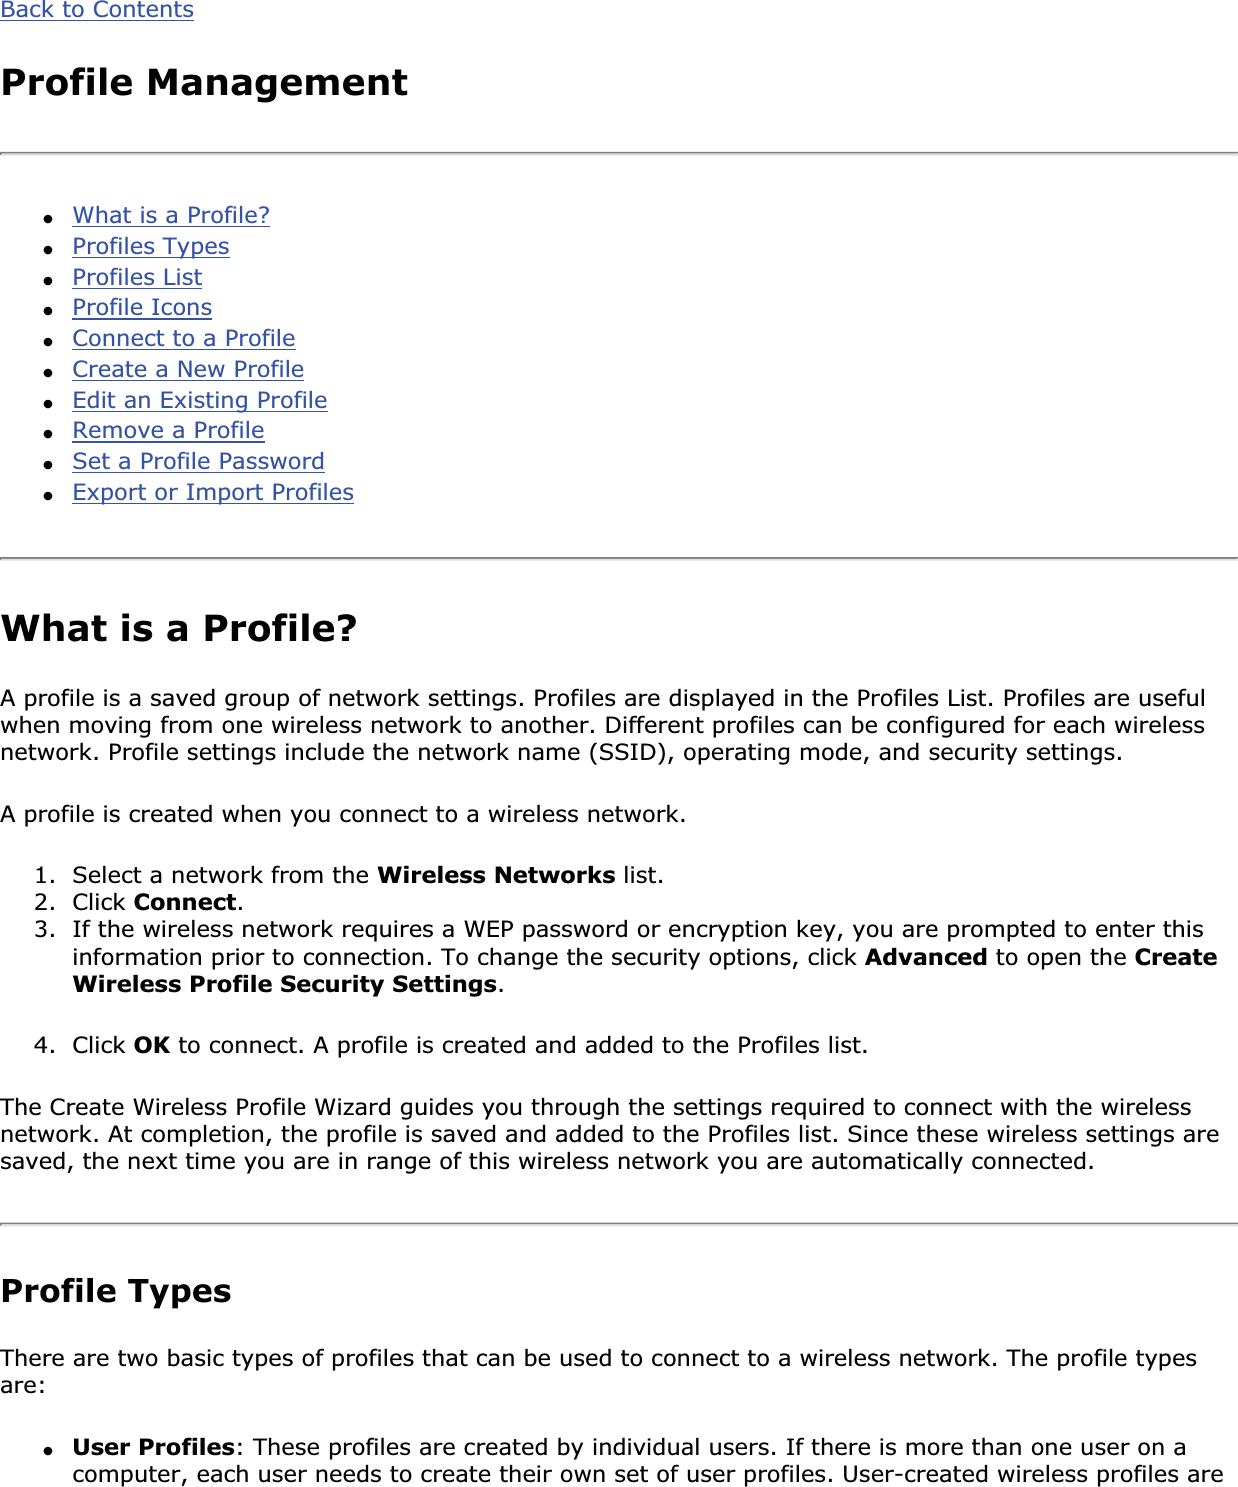 Back to ContentsProfile Management●What is a Profile?●Profiles Types●Profiles List●Profile Icons●Connect to a Profile●Create a New Profile●Edit an Existing Profile●Remove a Profile●Set a Profile Password●Export or Import ProfilesWhat is a Profile?A profile is a saved group of network settings. Profiles are displayed in the Profiles List. Profiles are useful when moving from one wireless network to another. Different profiles can be configured for each wireless network. Profile settings include the network name (SSID), operating mode, and security settings. A profile is created when you connect to a wireless network. 1. Select a network from the Wireless Networks list.2. Click Connect.3. If the wireless network requires a WEP password or encryption key, you are prompted to enter this information prior to connection. To change the security options, click Advanced to open the CreateWireless Profile Security Settings.4. Click OK to connect. A profile is created and added to the Profiles list.The Create Wireless Profile Wizard guides you through the settings required to connect with the wireless network. At completion, the profile is saved and added to the Profiles list. Since these wireless settings are saved, the next time you are in range of this wireless network you are automatically connected. Profile TypesThere are two basic types of profiles that can be used to connect to a wireless network. The profile types are:●User Profiles: These profiles are created by individual users. If there is more than one user on a computer, each user needs to create their own set of user profiles. User-created wireless profiles are 